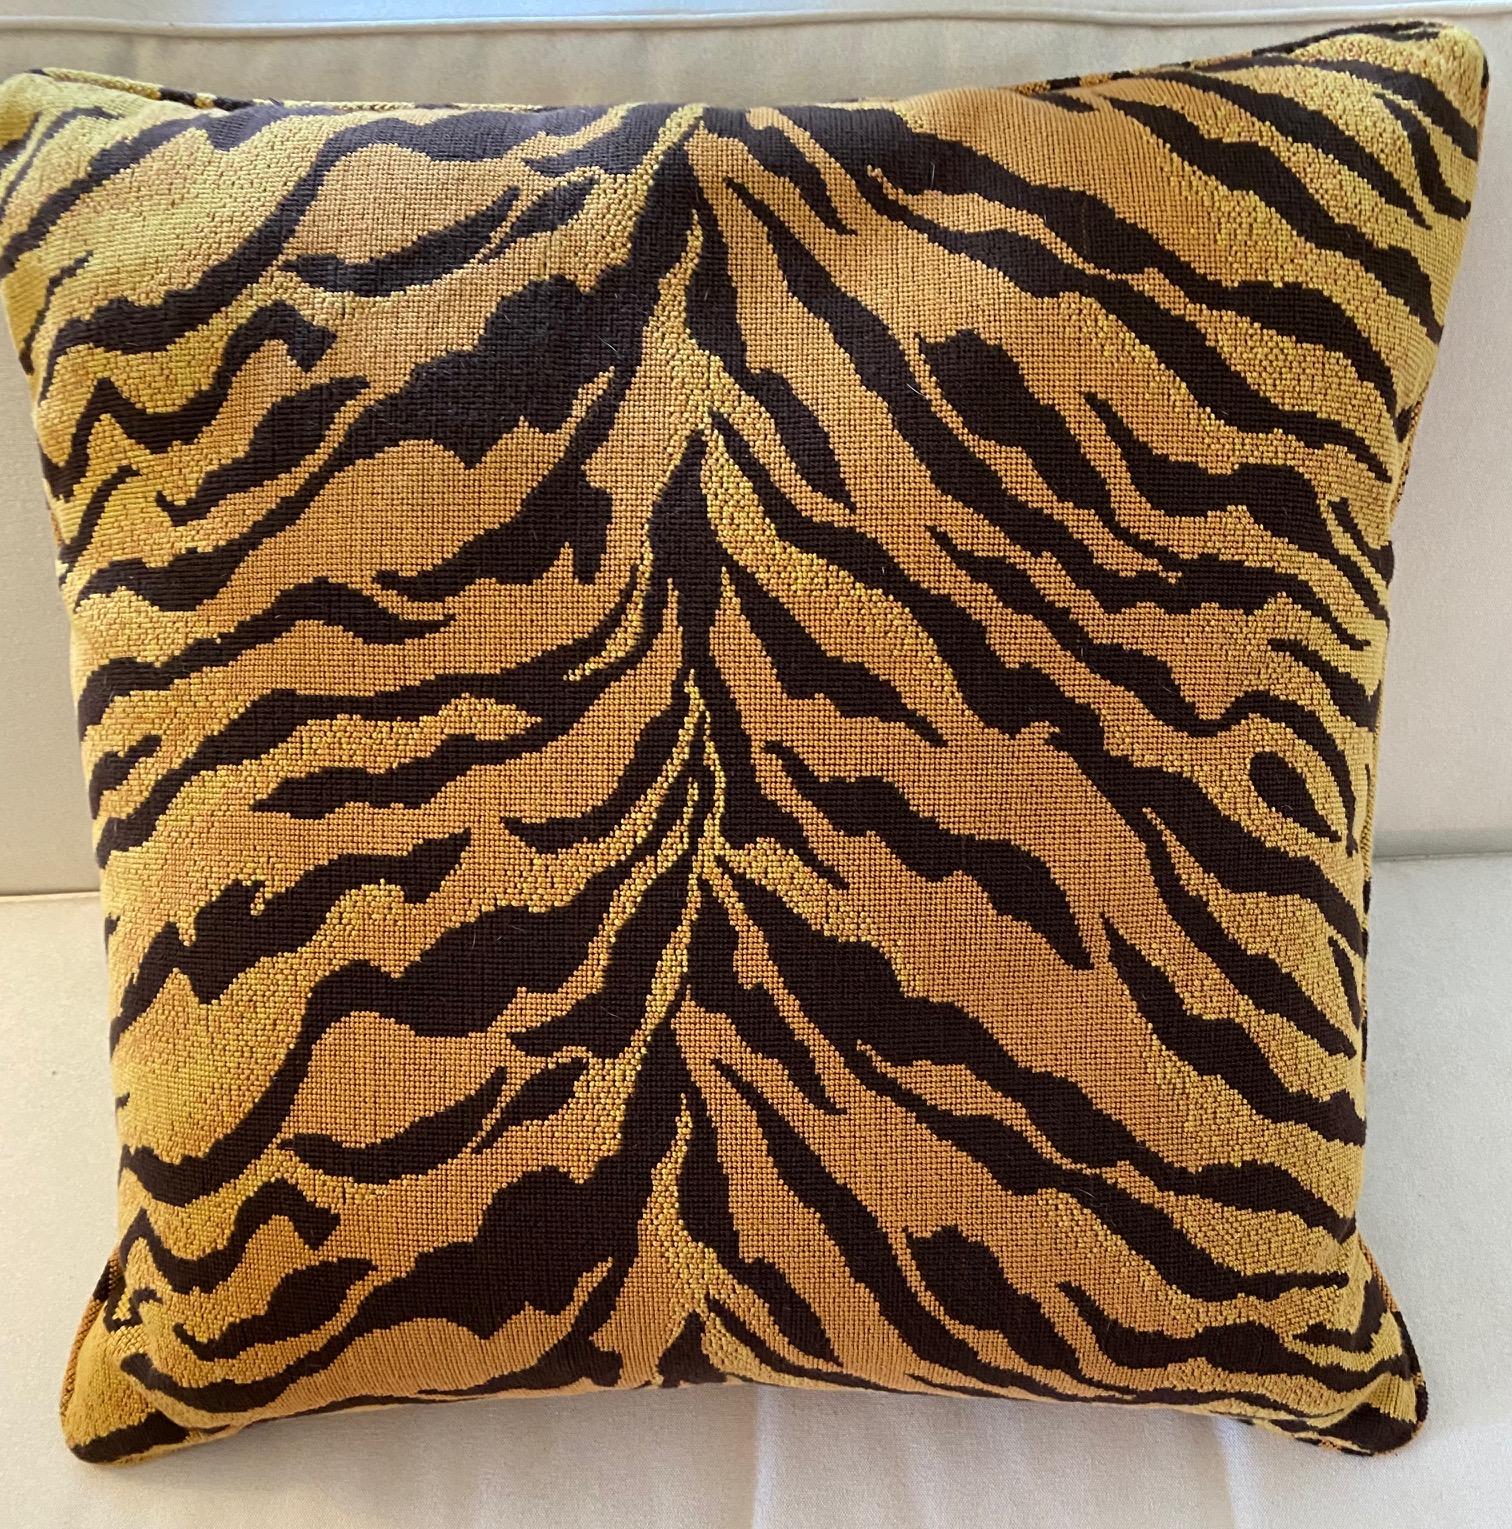 Large and decorative pair of tiger cushions.
Measures: 24